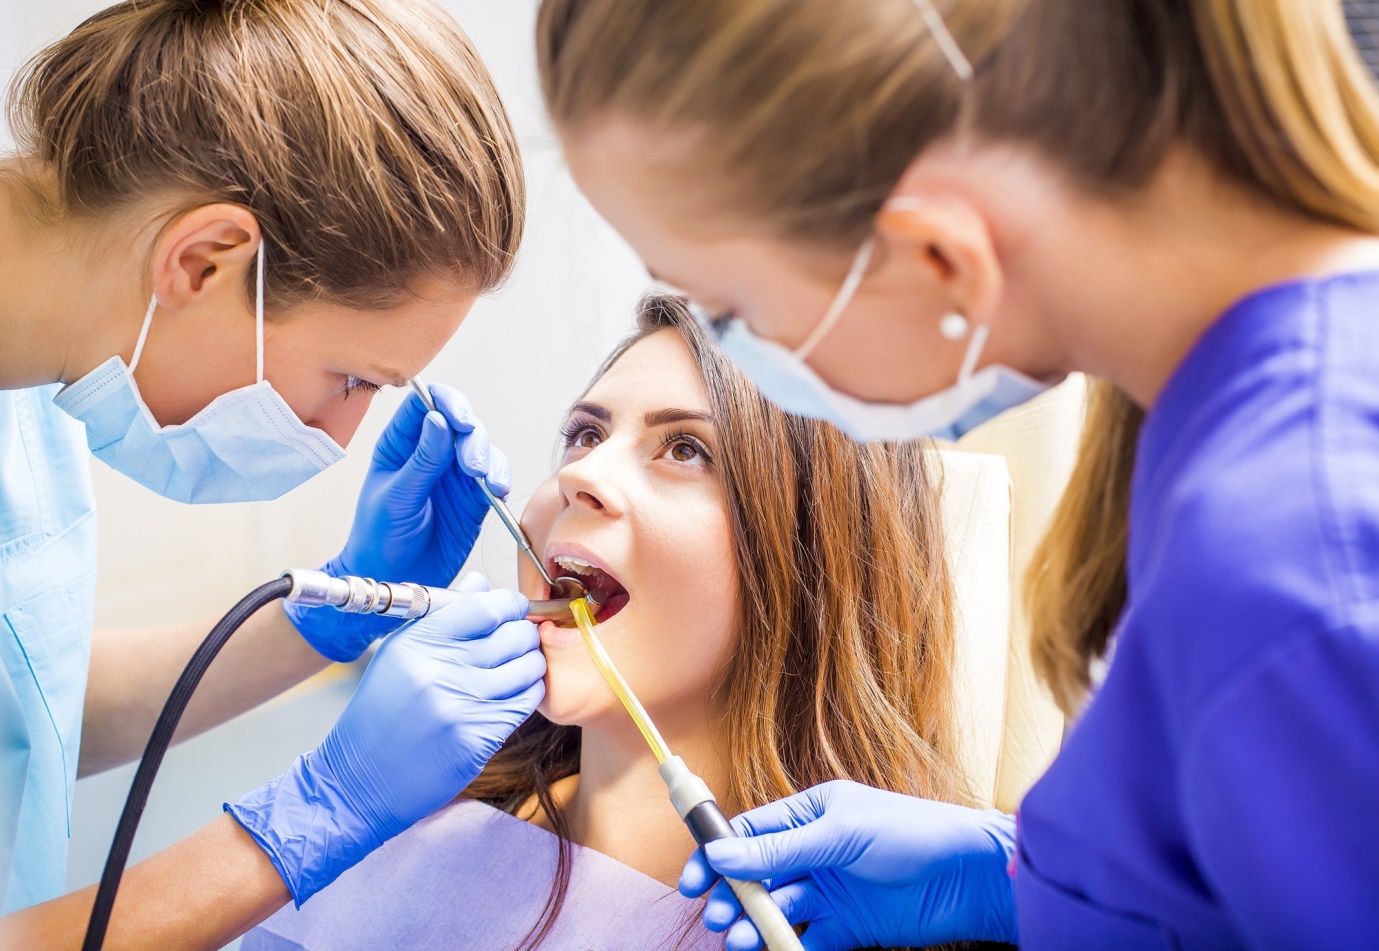 How To Bring More Patients to Your Dental Practice